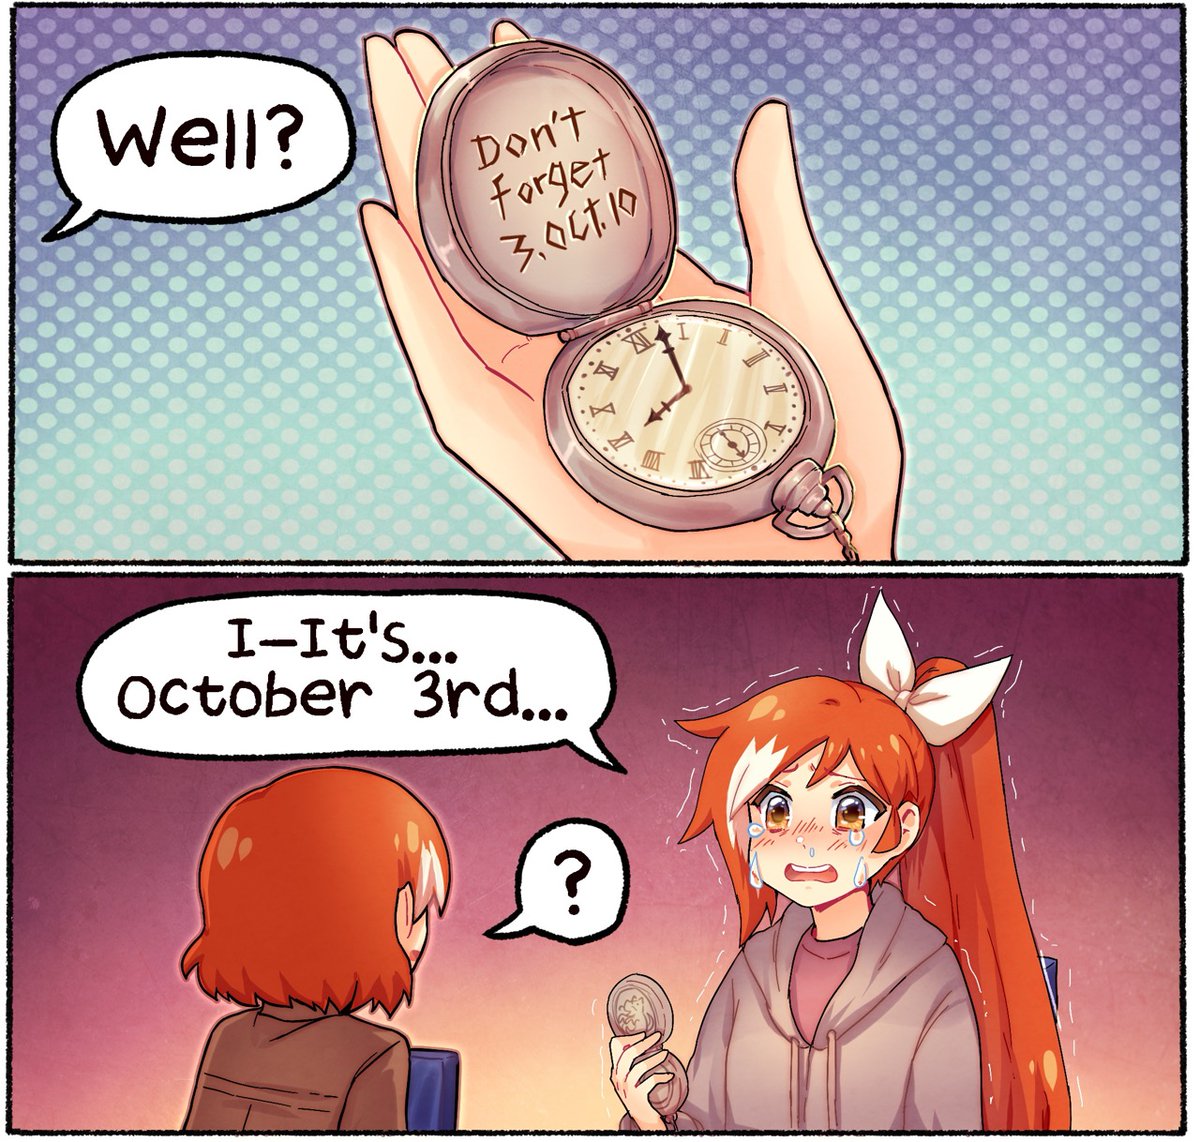 In this week's The Daily Life of Crunchyroll-Hime (by @coughdrops) 🩷✨ Hime remembers an important day 😅